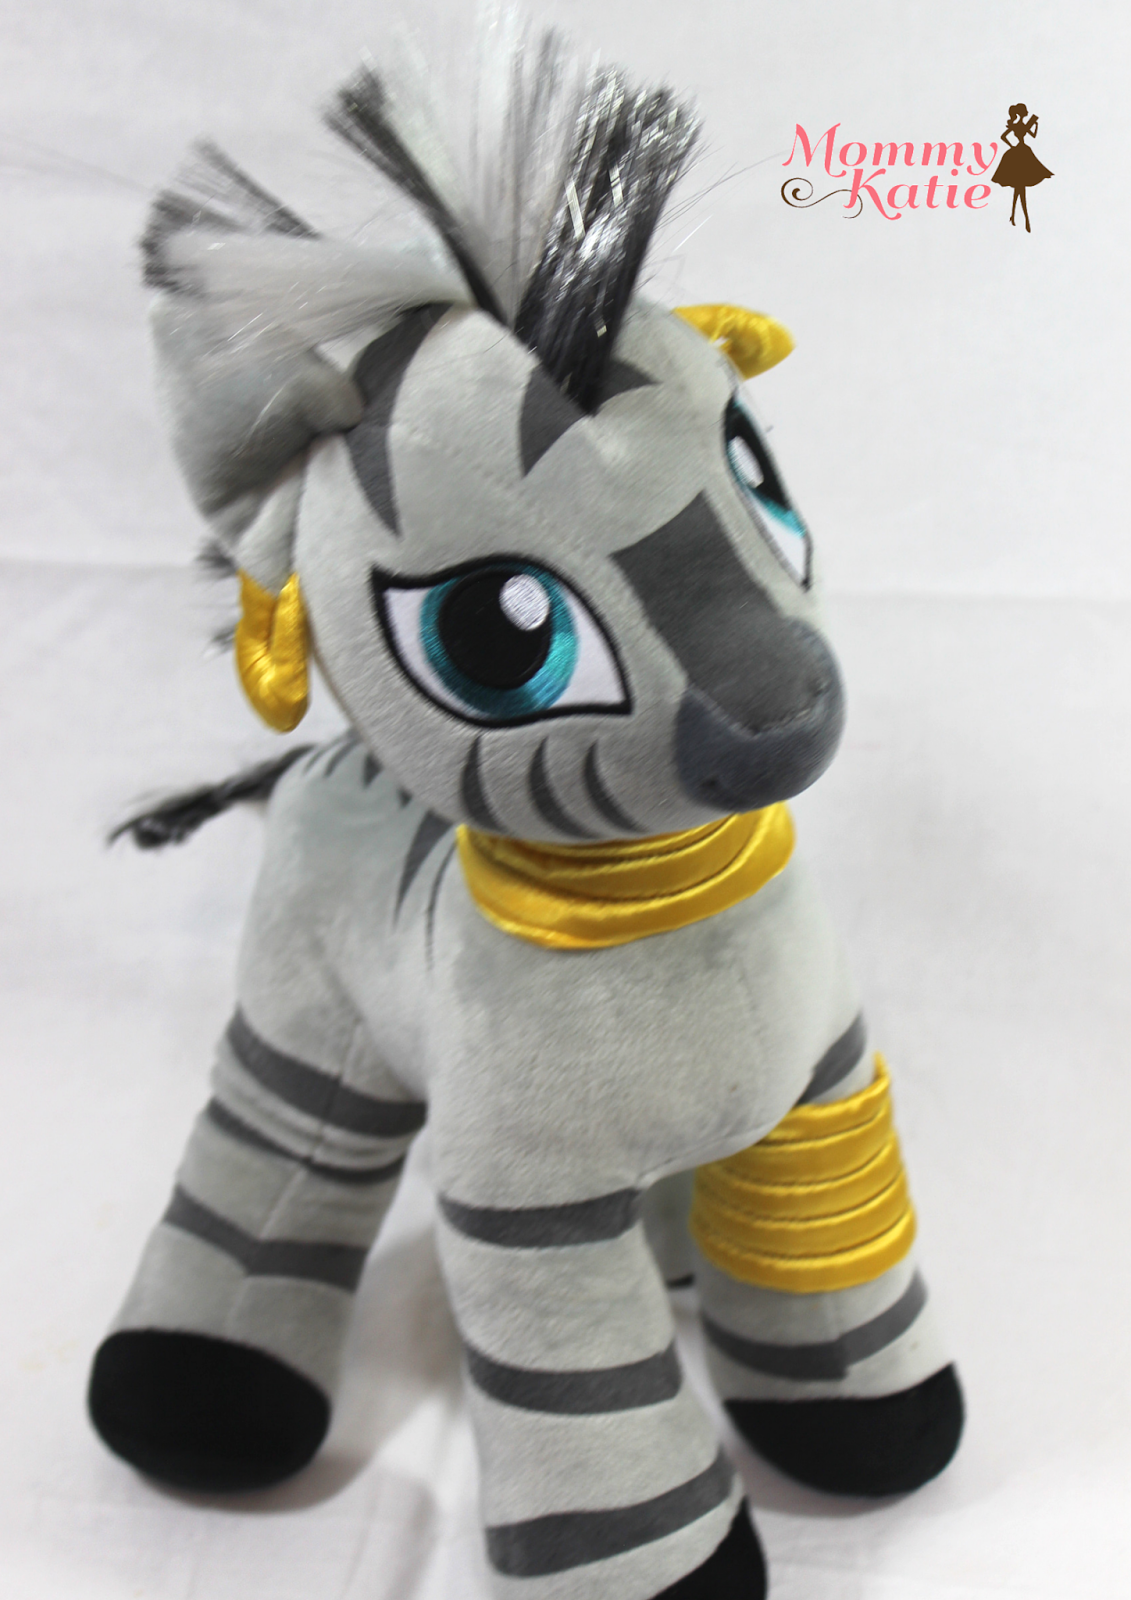 My Little Pony Zecora At Build A Bear Workshop Mommy Katie - alien harvest servitor roblox galaxy official wikia